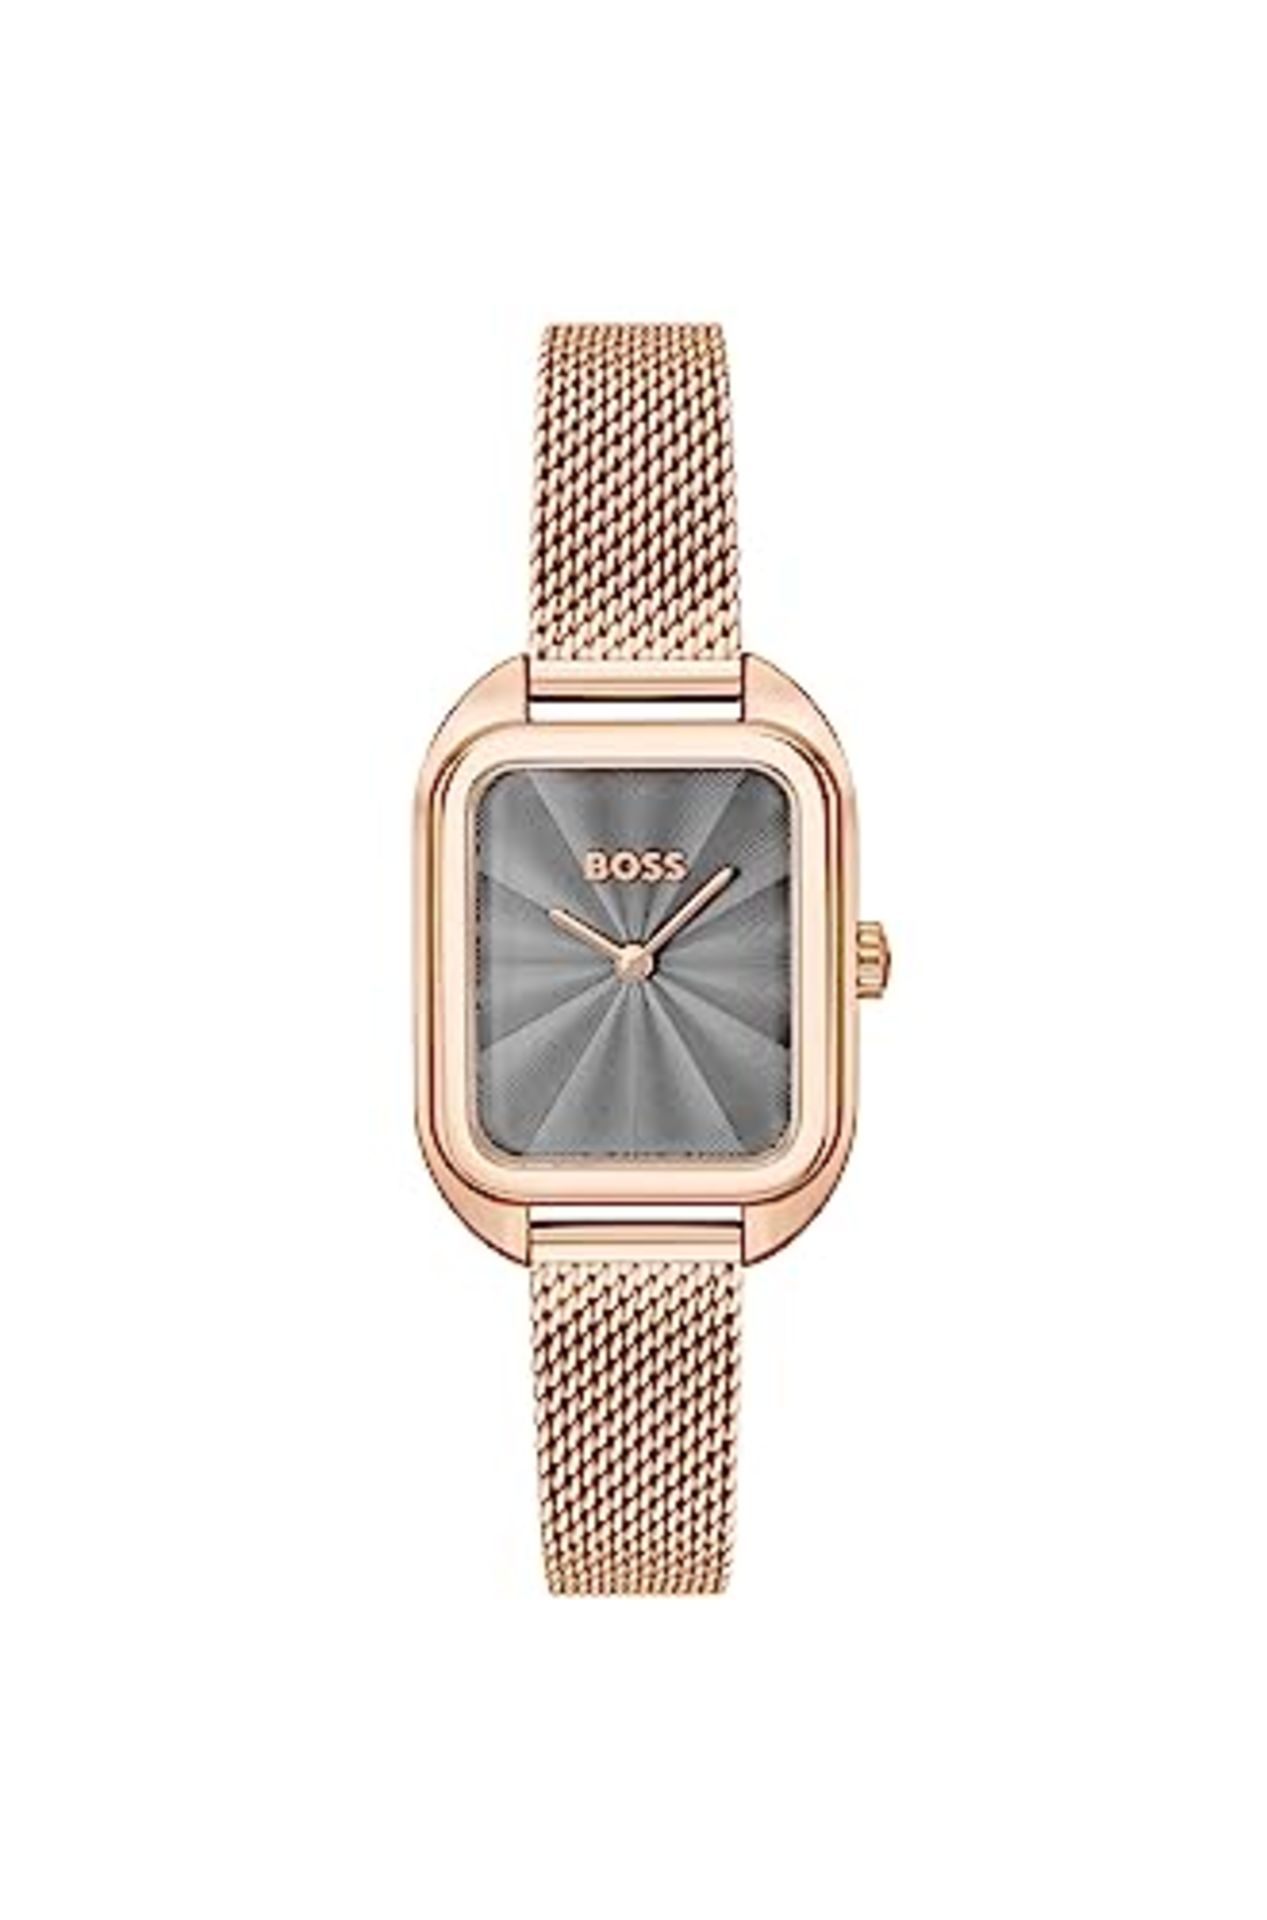 RRP £279.00 BOSS Analog quartz watch for women with rose gold stainless steel bracelet - 1502683 - Image 4 of 6